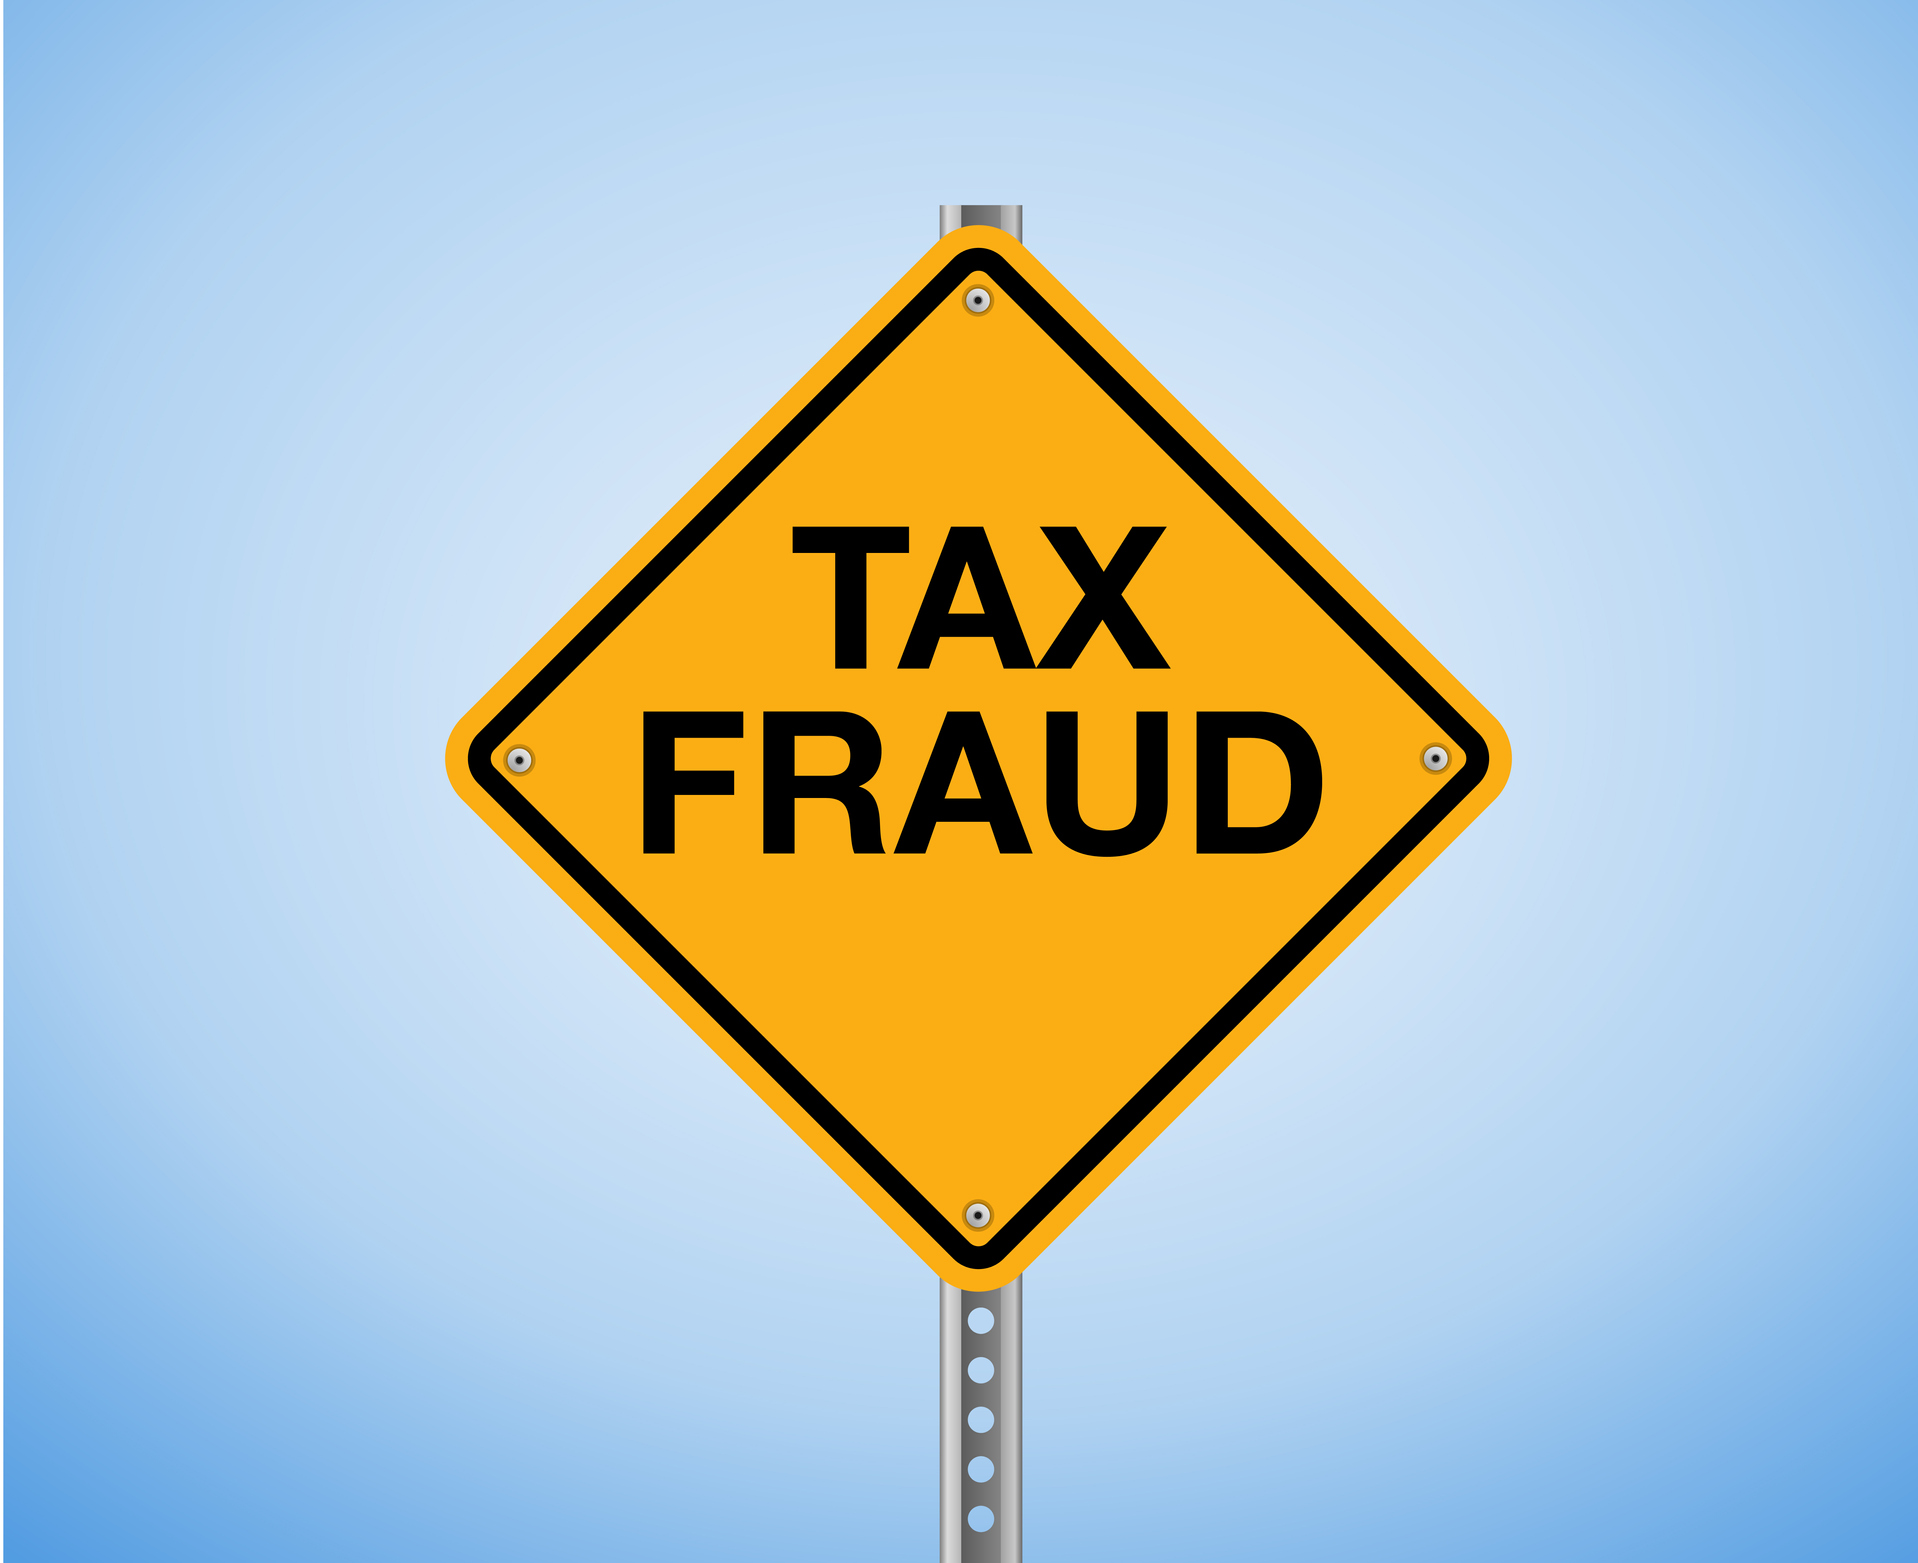 Image of a yield road sign that reads Tax Fraud in capital letters